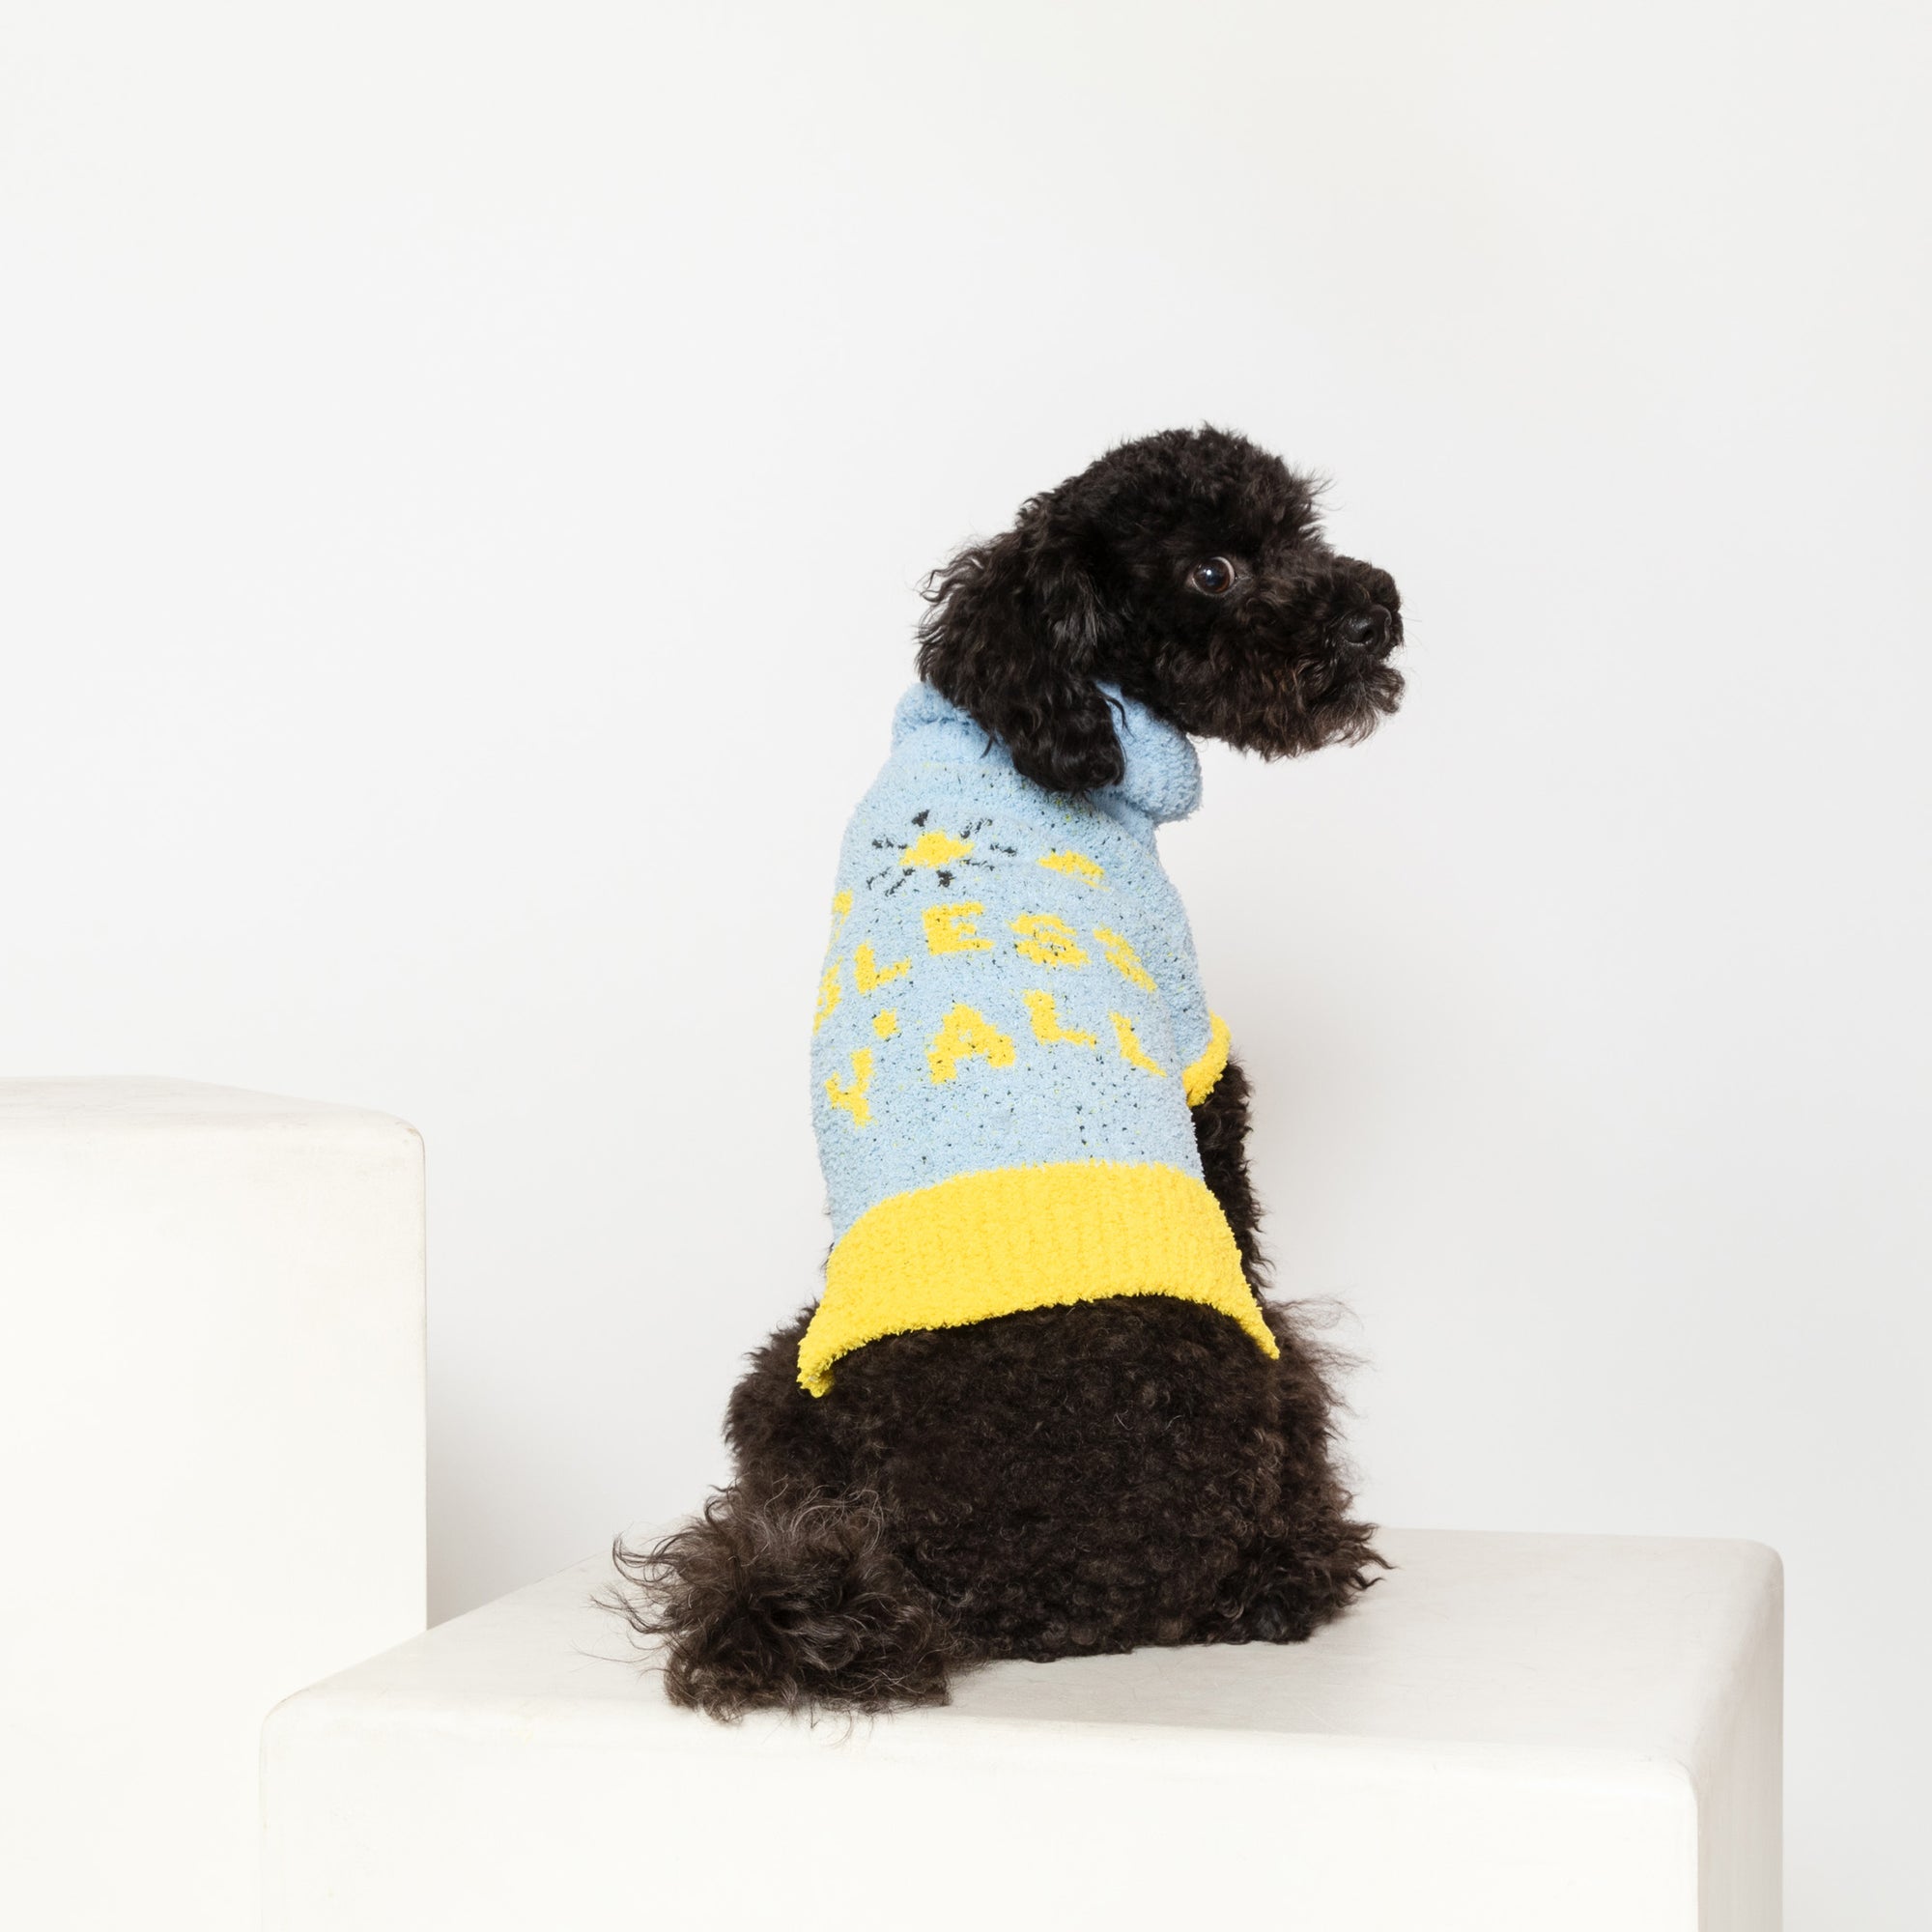  Black poodle in a blue "The Furryfolks" sweater looks left, perched on a white block against a neutral backdrop.